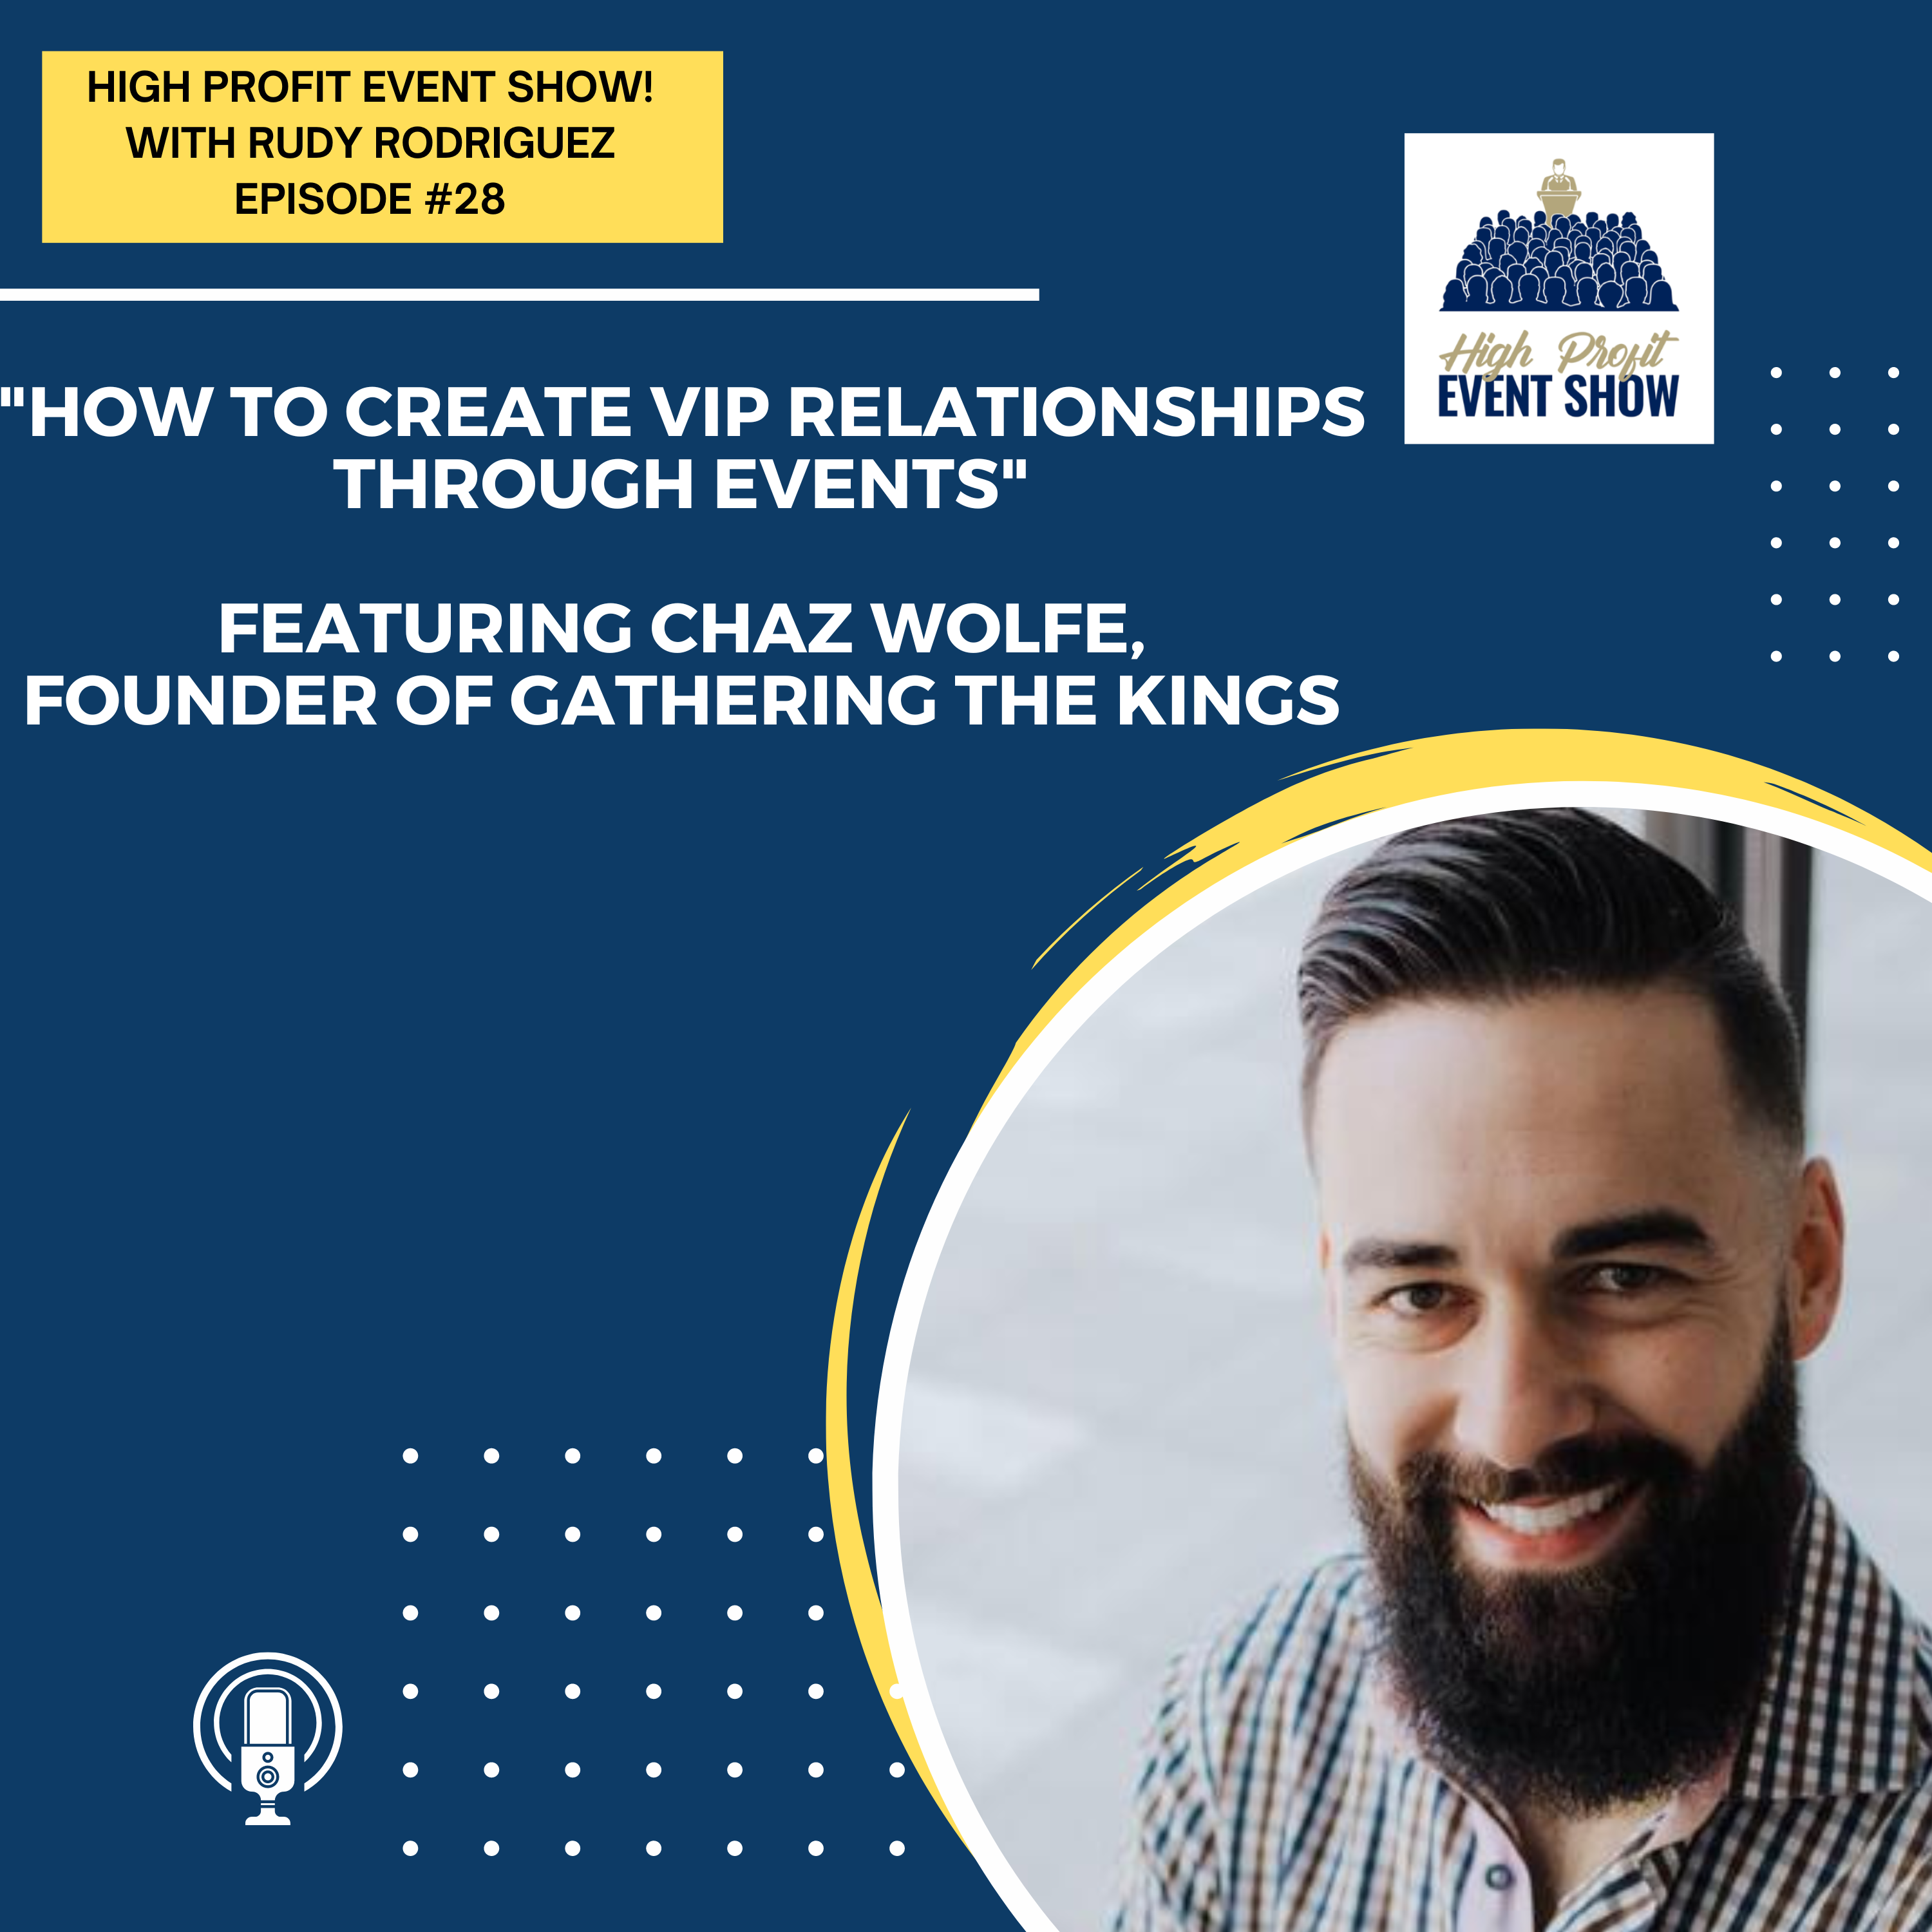 Episode 28: How to Create VIP Relationships Through Events with Chaz Wolfe!